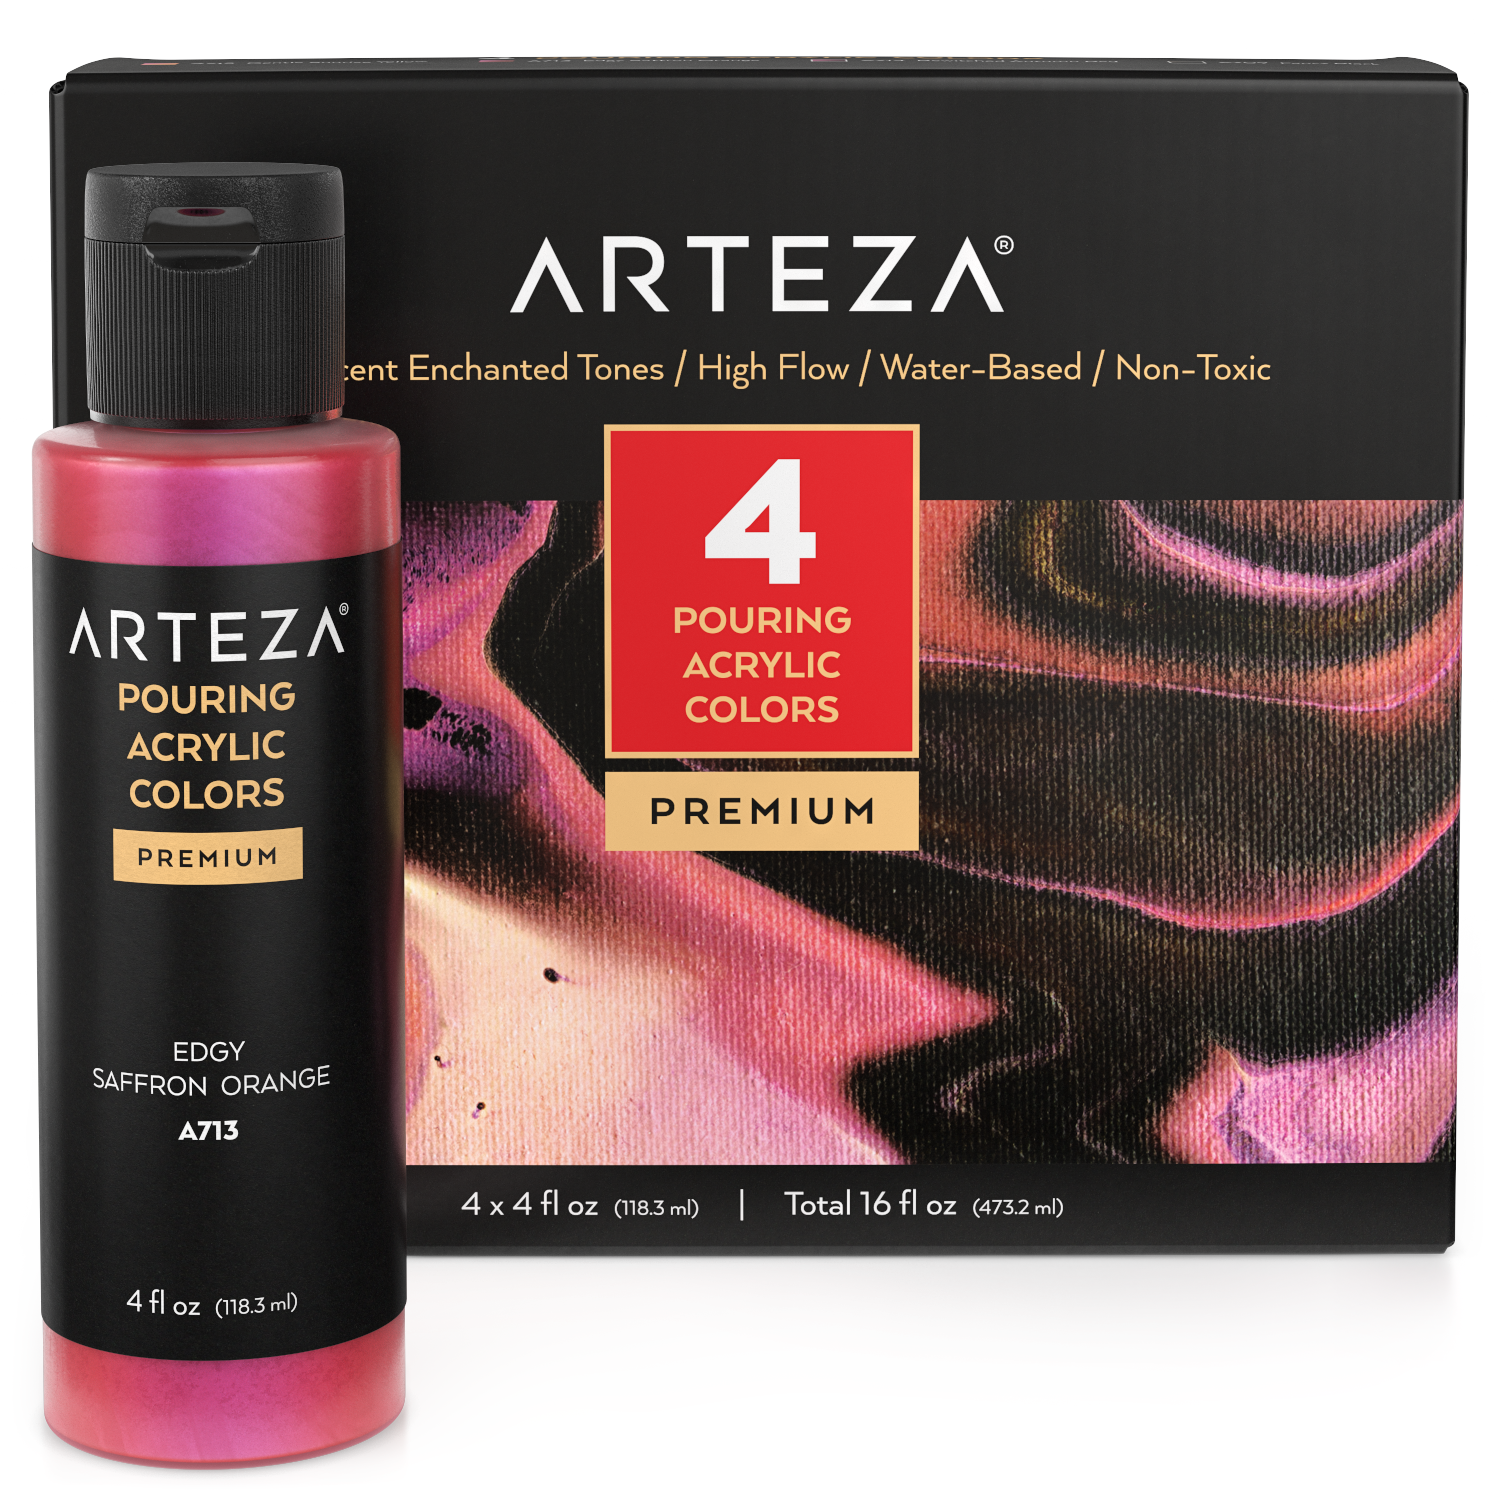 Arteza on X: We hope your #MemorialDay is super shiny! ✨ Add a